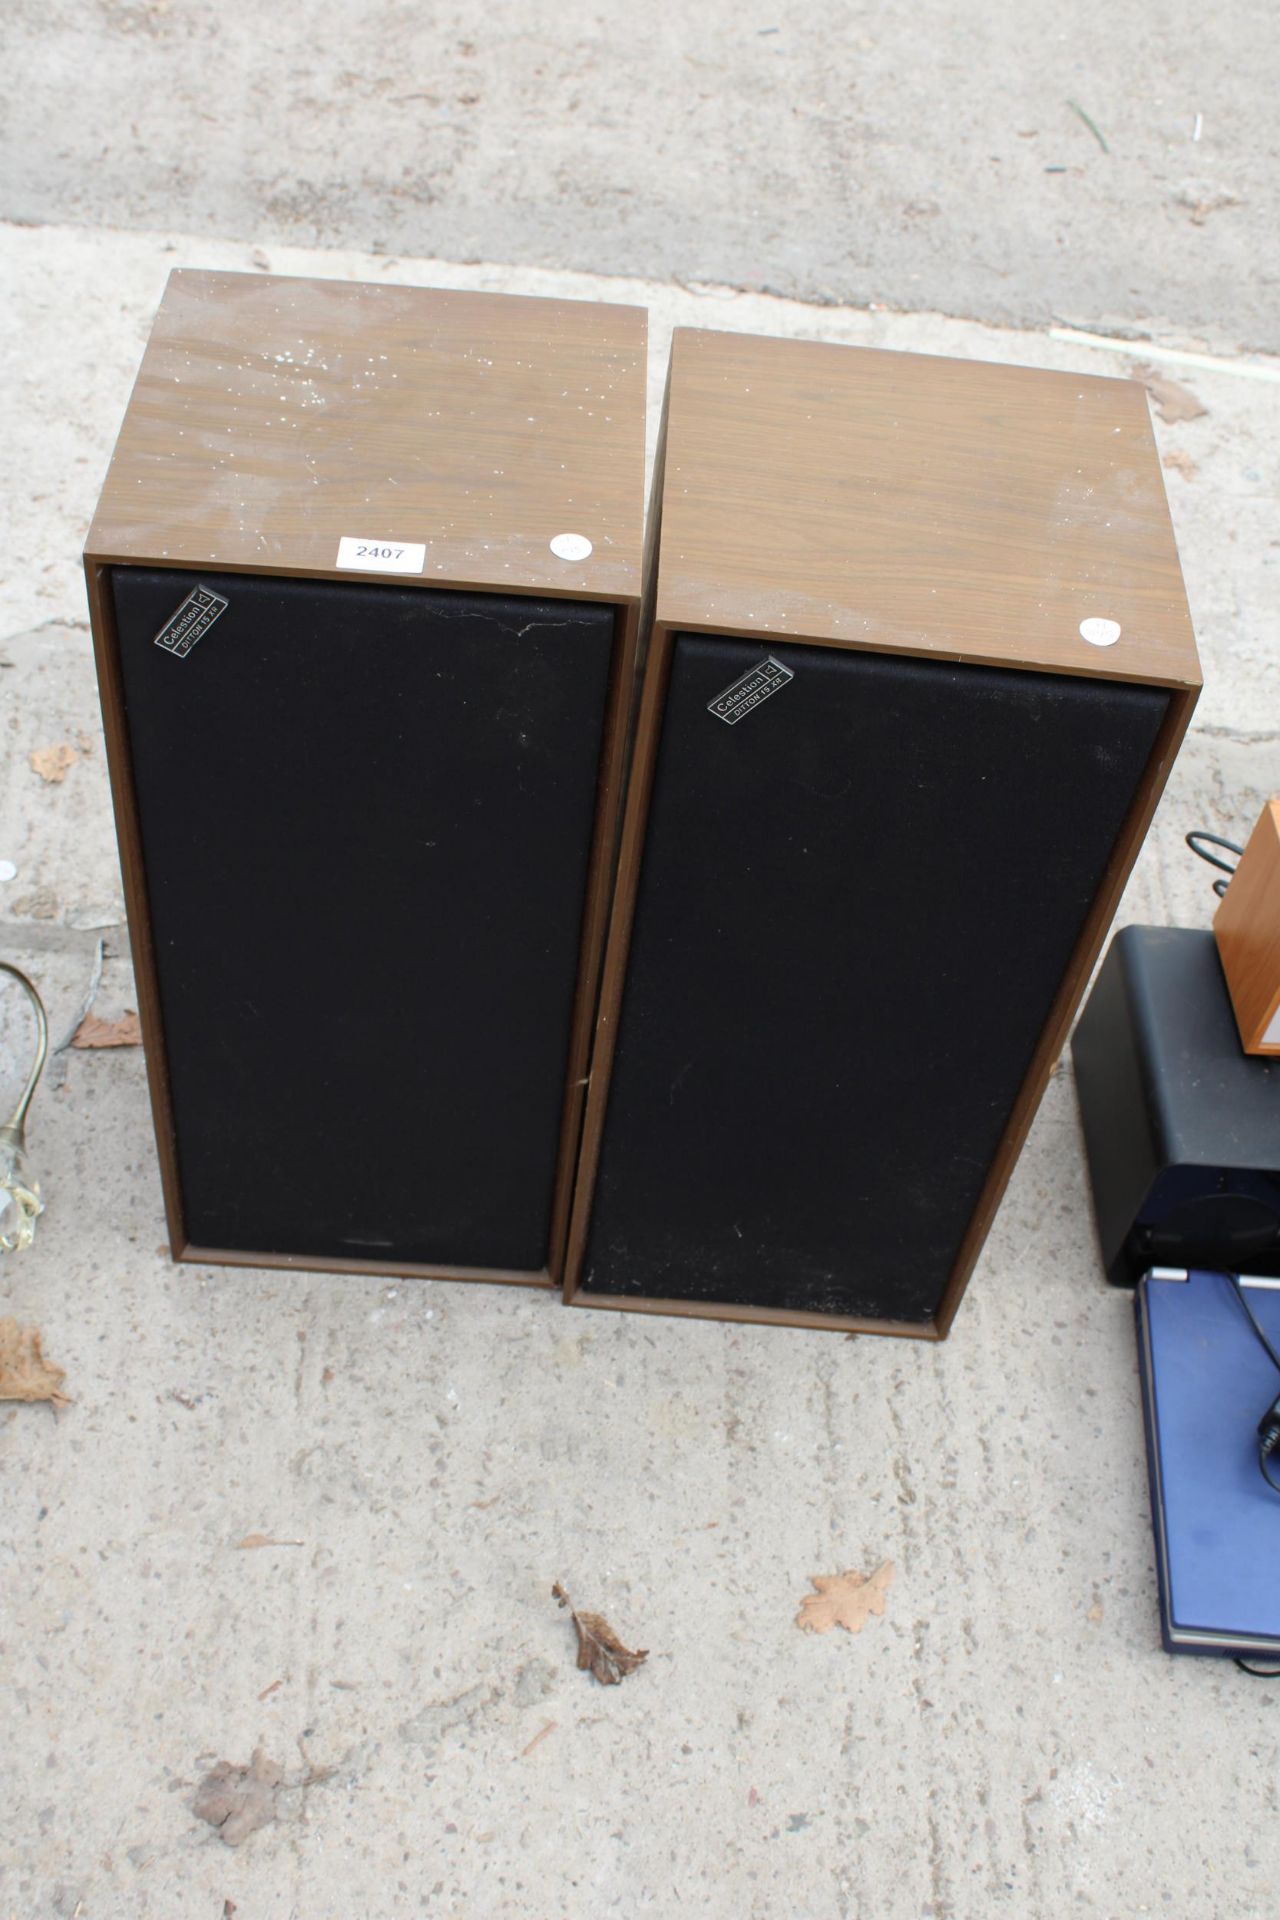 A PAIR OF CELESTION SPEAKERS